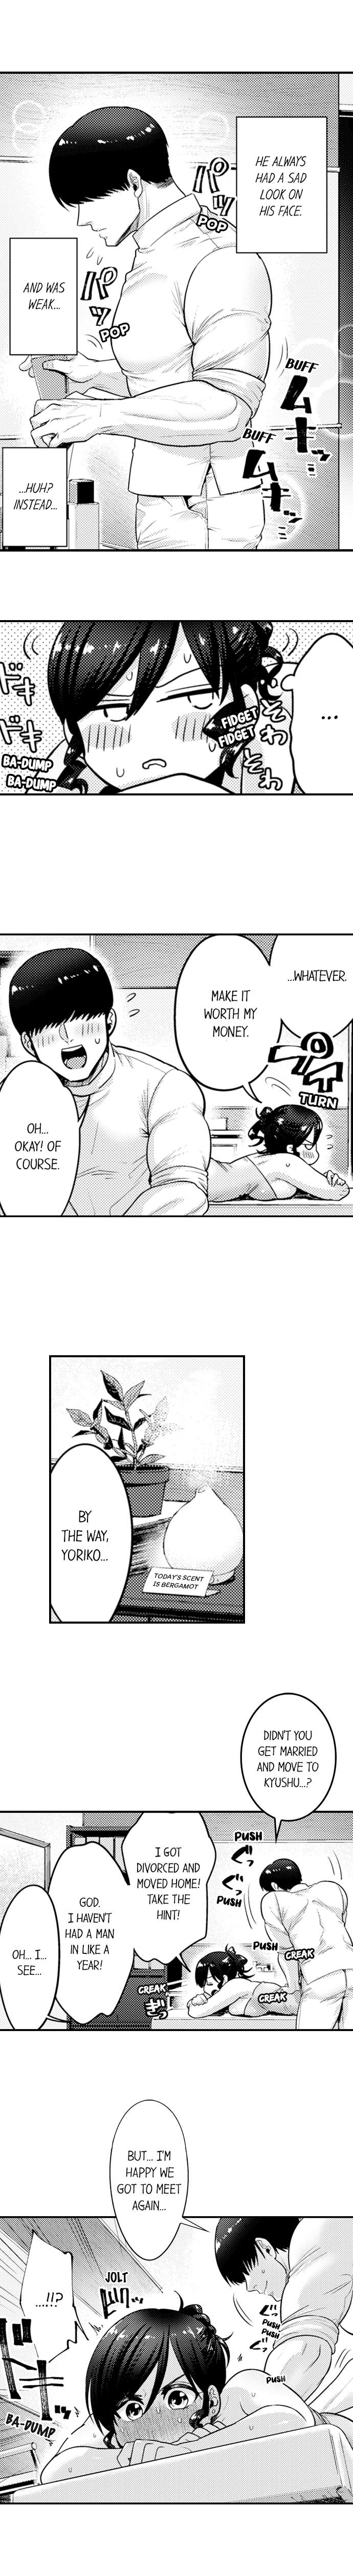 The Massage ♂♀ The Pleasure of Full Course Sex Chapter 3 - Page 3